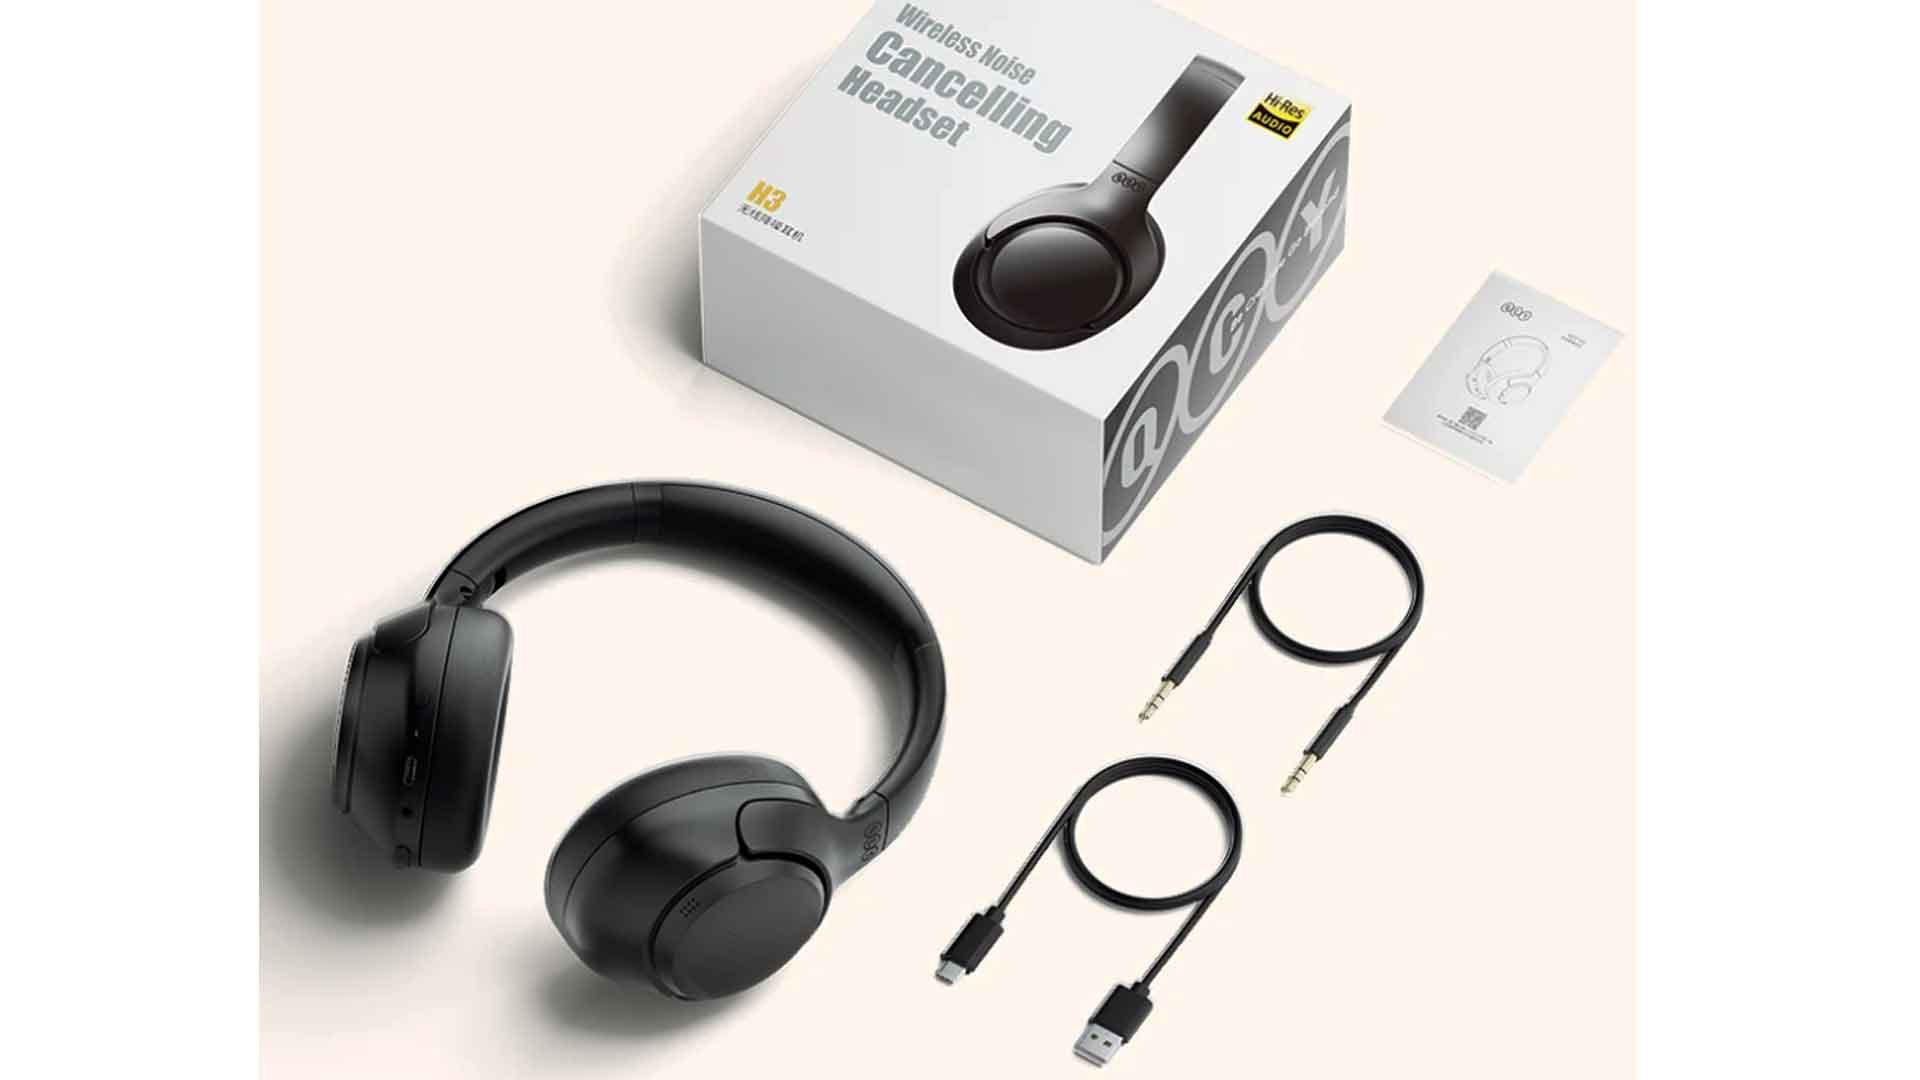 QCY H3 headphones, QCY H3 price, QCY H3 features, QCY H3 specs, wireless headphones, best wireless headphones, audiophile, Hi-Res audio, QCY headphones, headset, best music headphones, best headphones for music, DJ headset